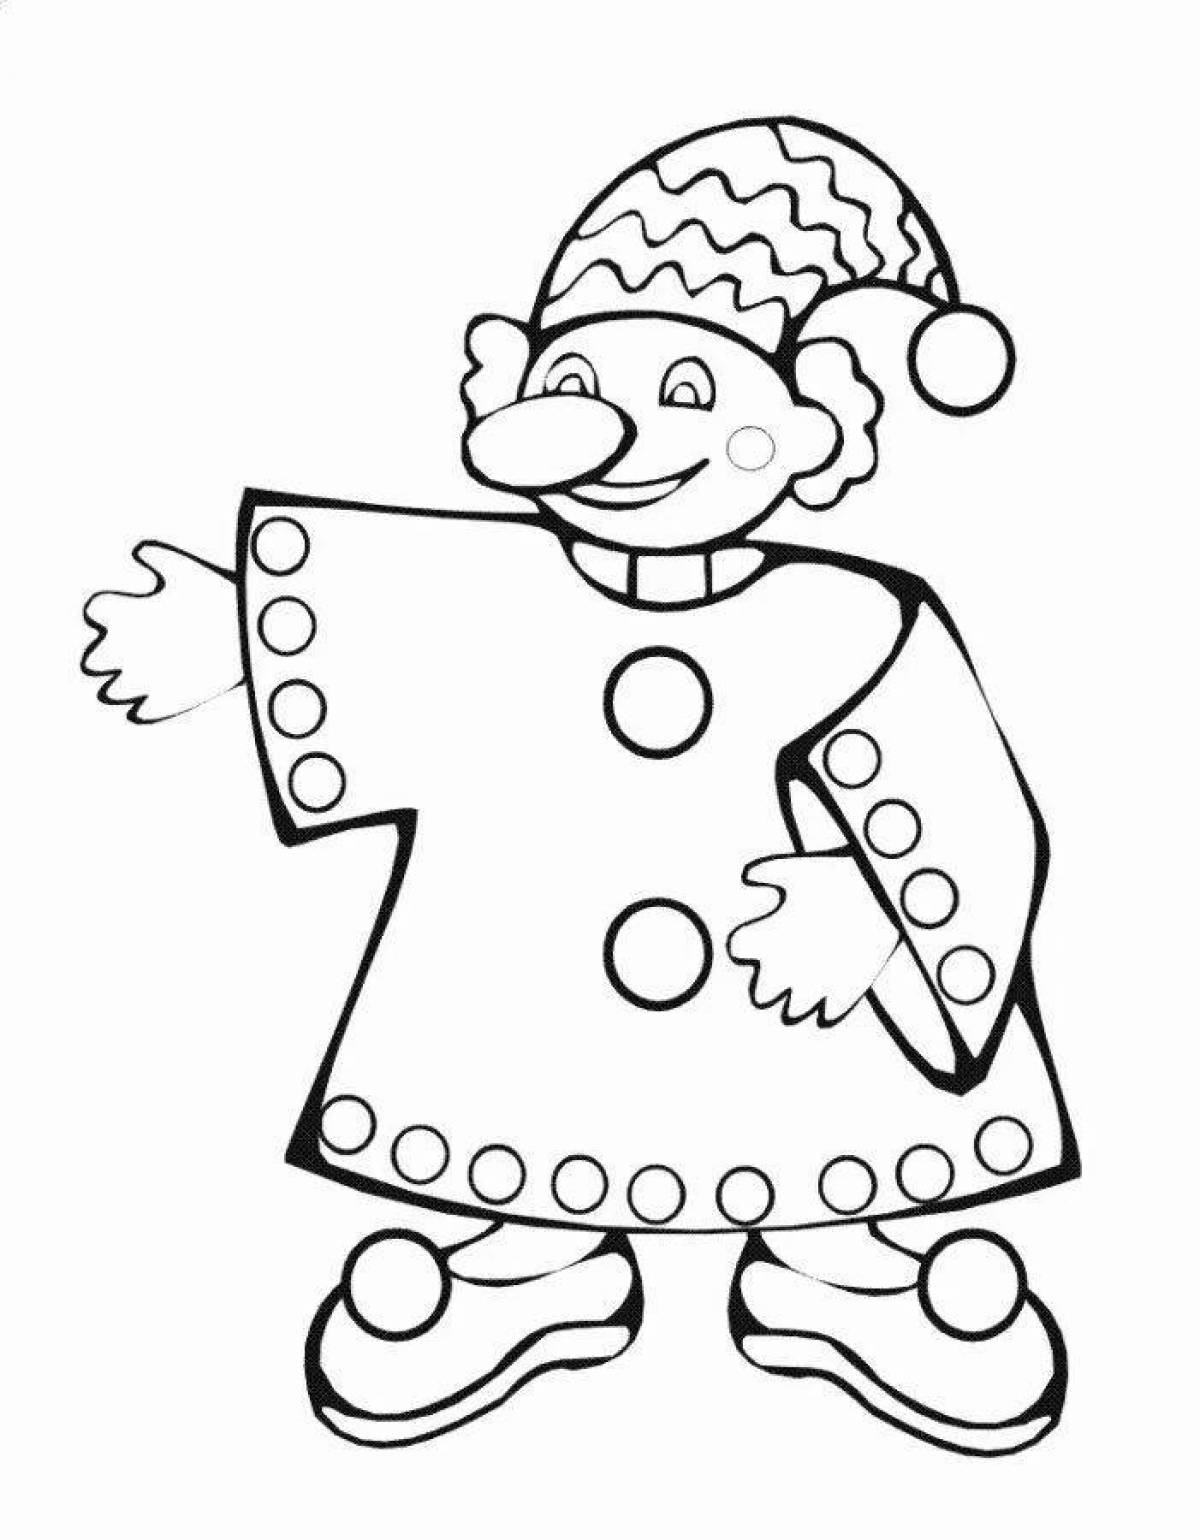 Jester's funny coloring book